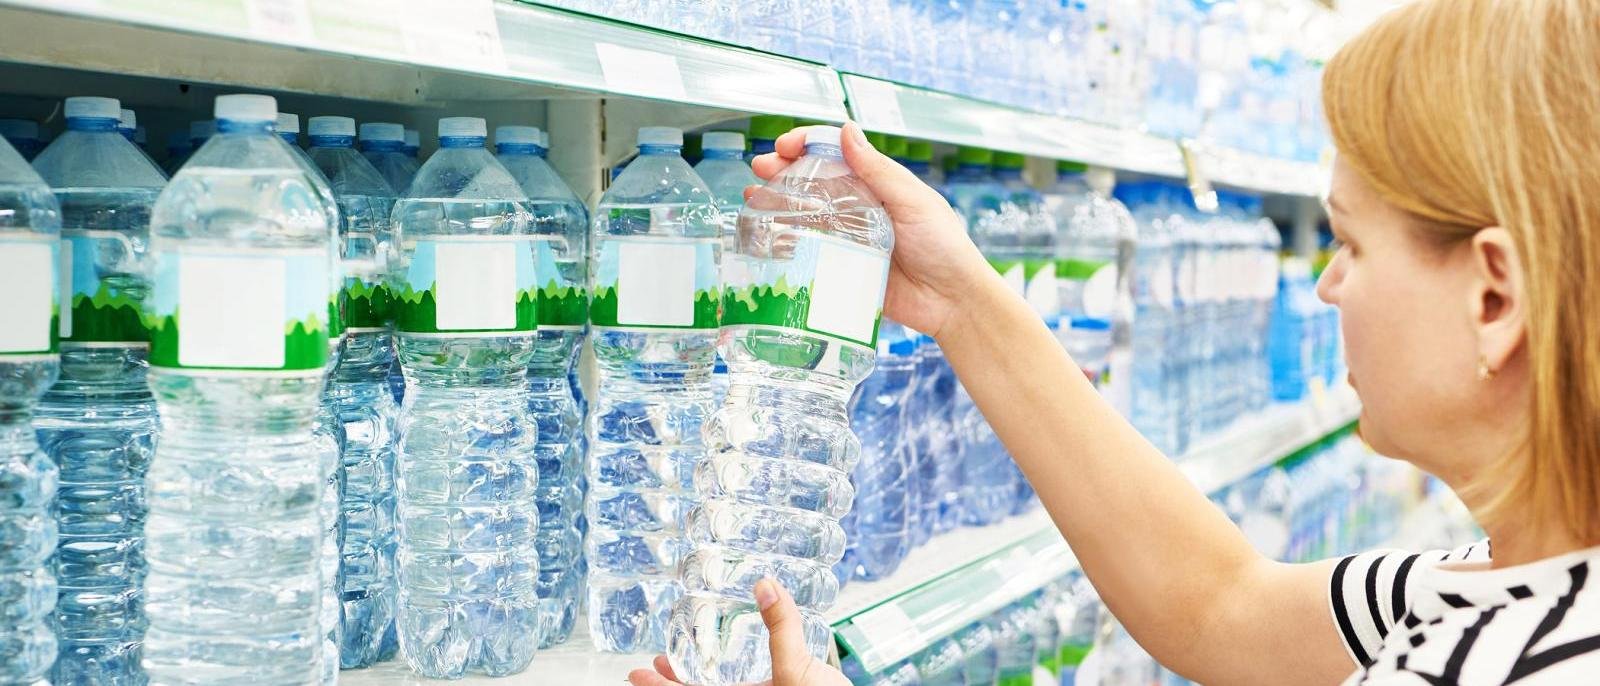 Bottled water contains hundreds of thousands of nanoplastics: Columbia University